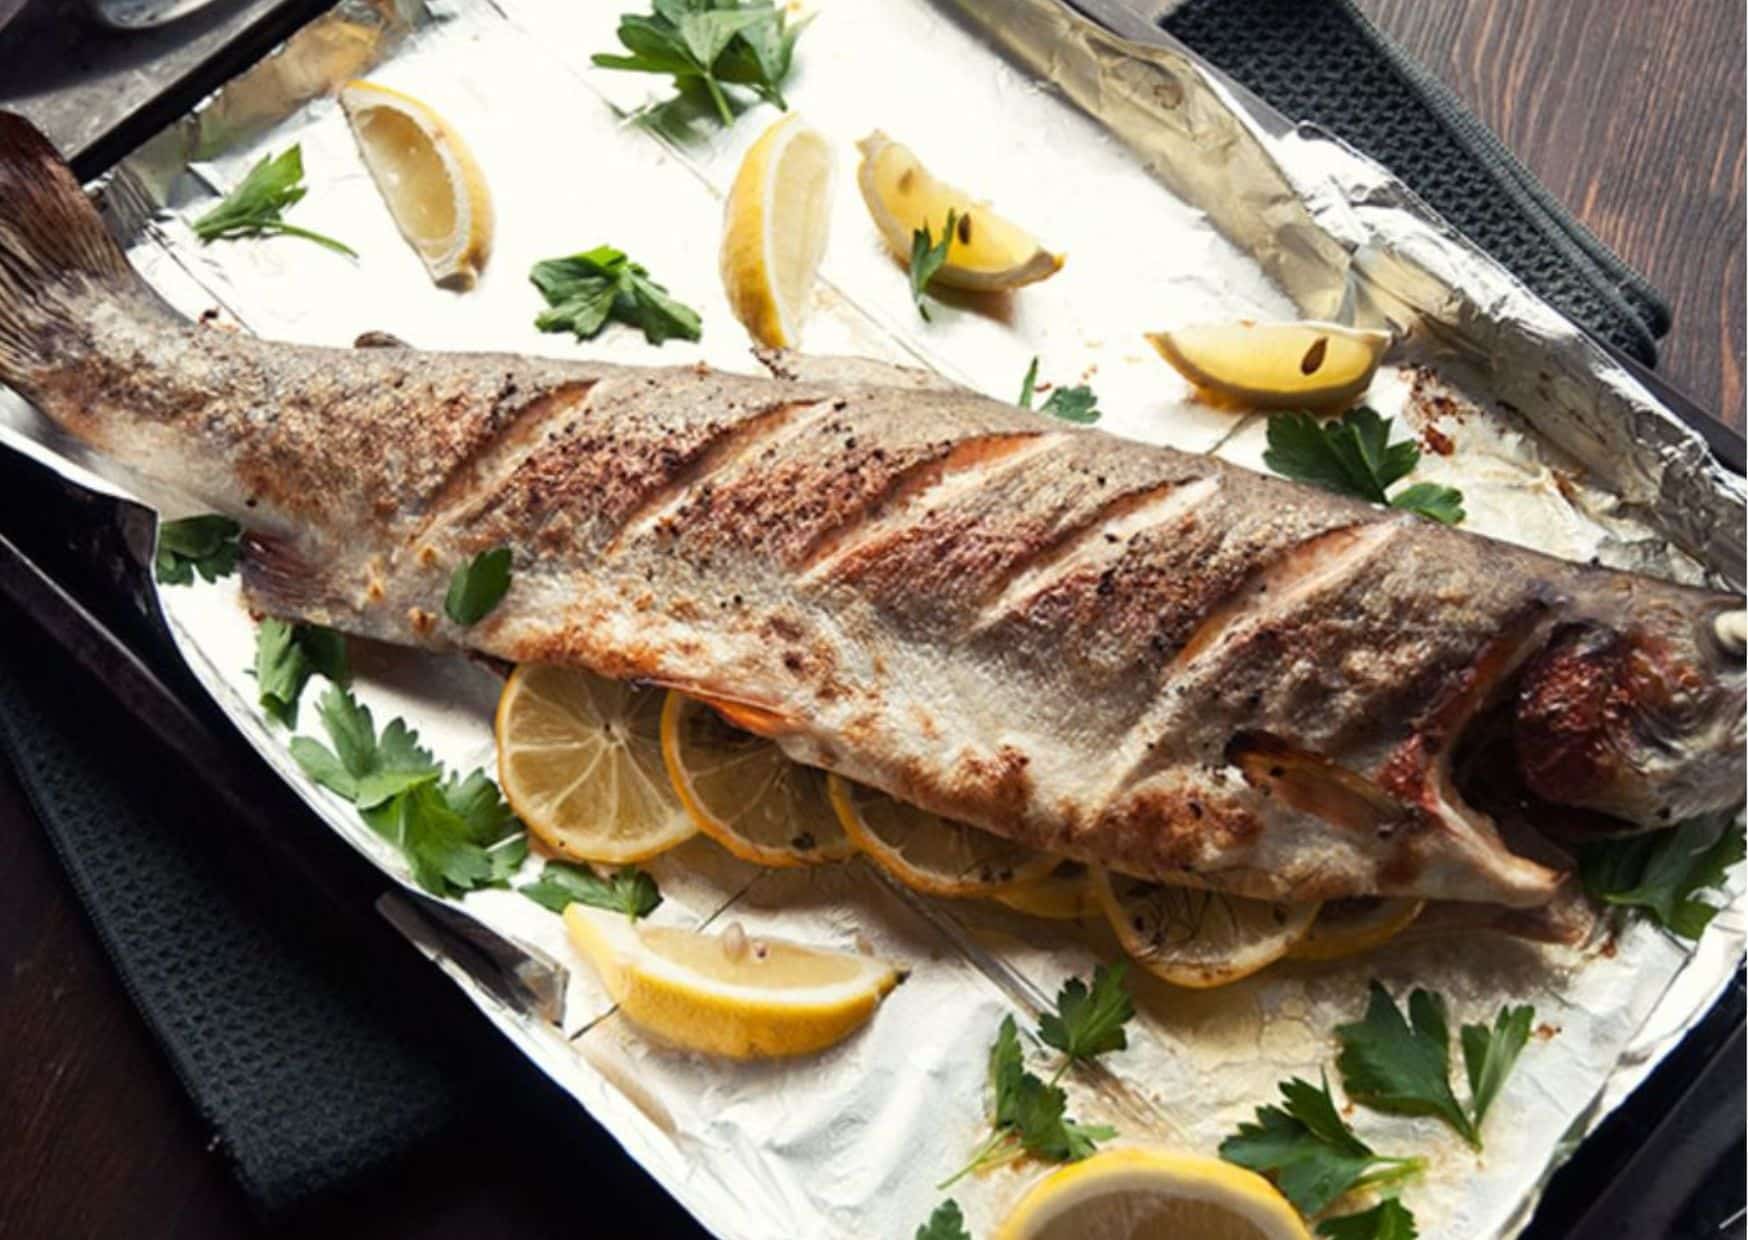 Whole Fish And Grilled Trout Recipe